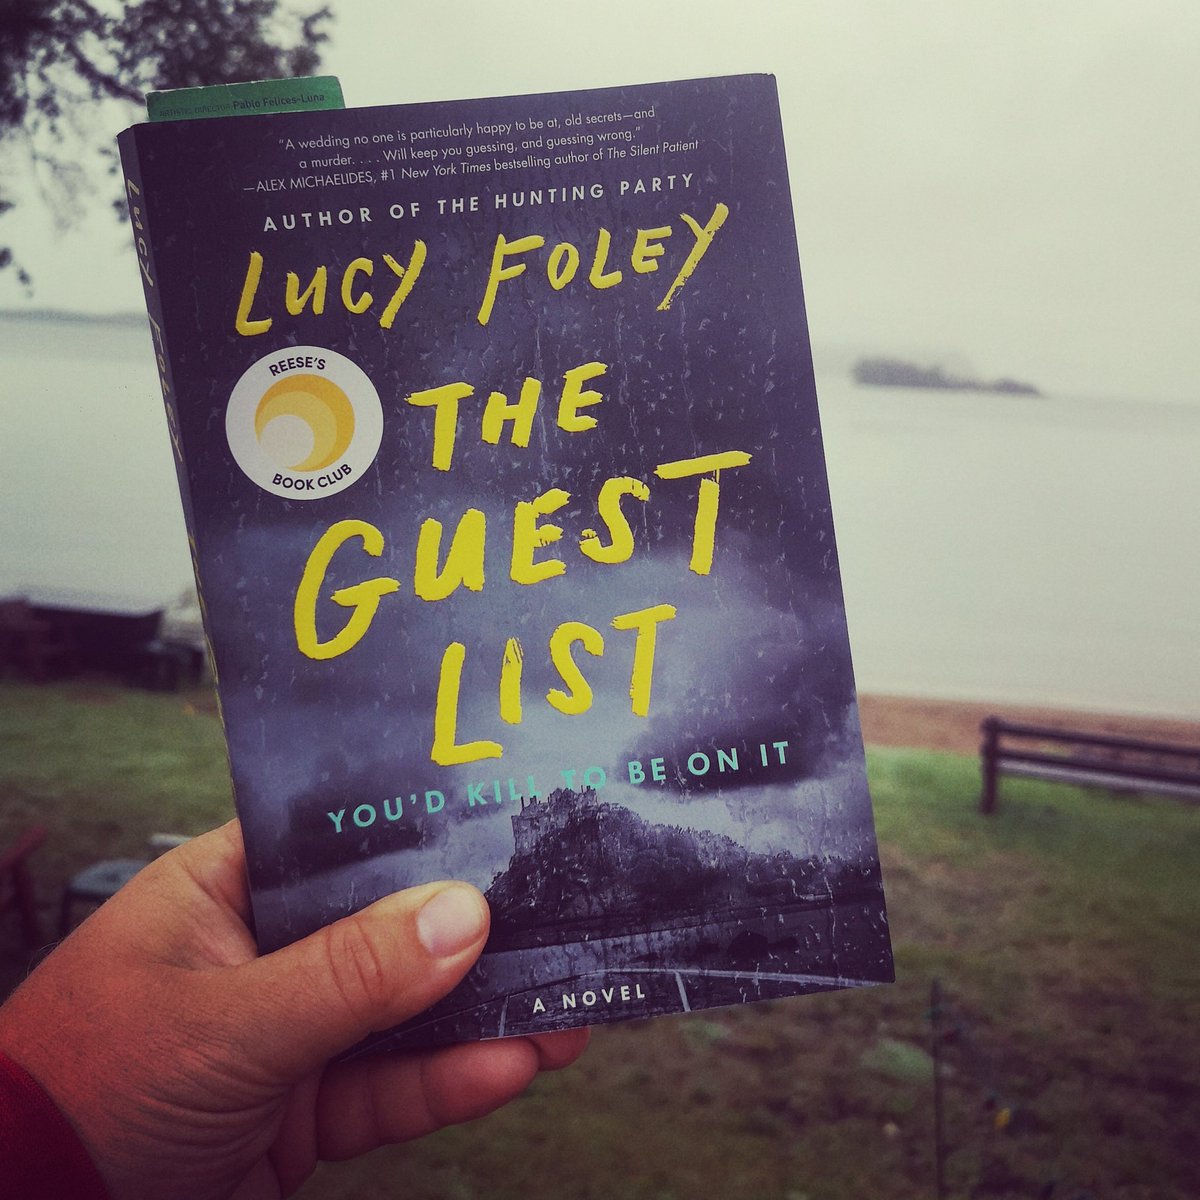 A gloomy evening makes a great time to start the book 'THE GUEST LIST' by Lucy Foley 

#LucyFoley #summerreading #currentlyreading #book #reading